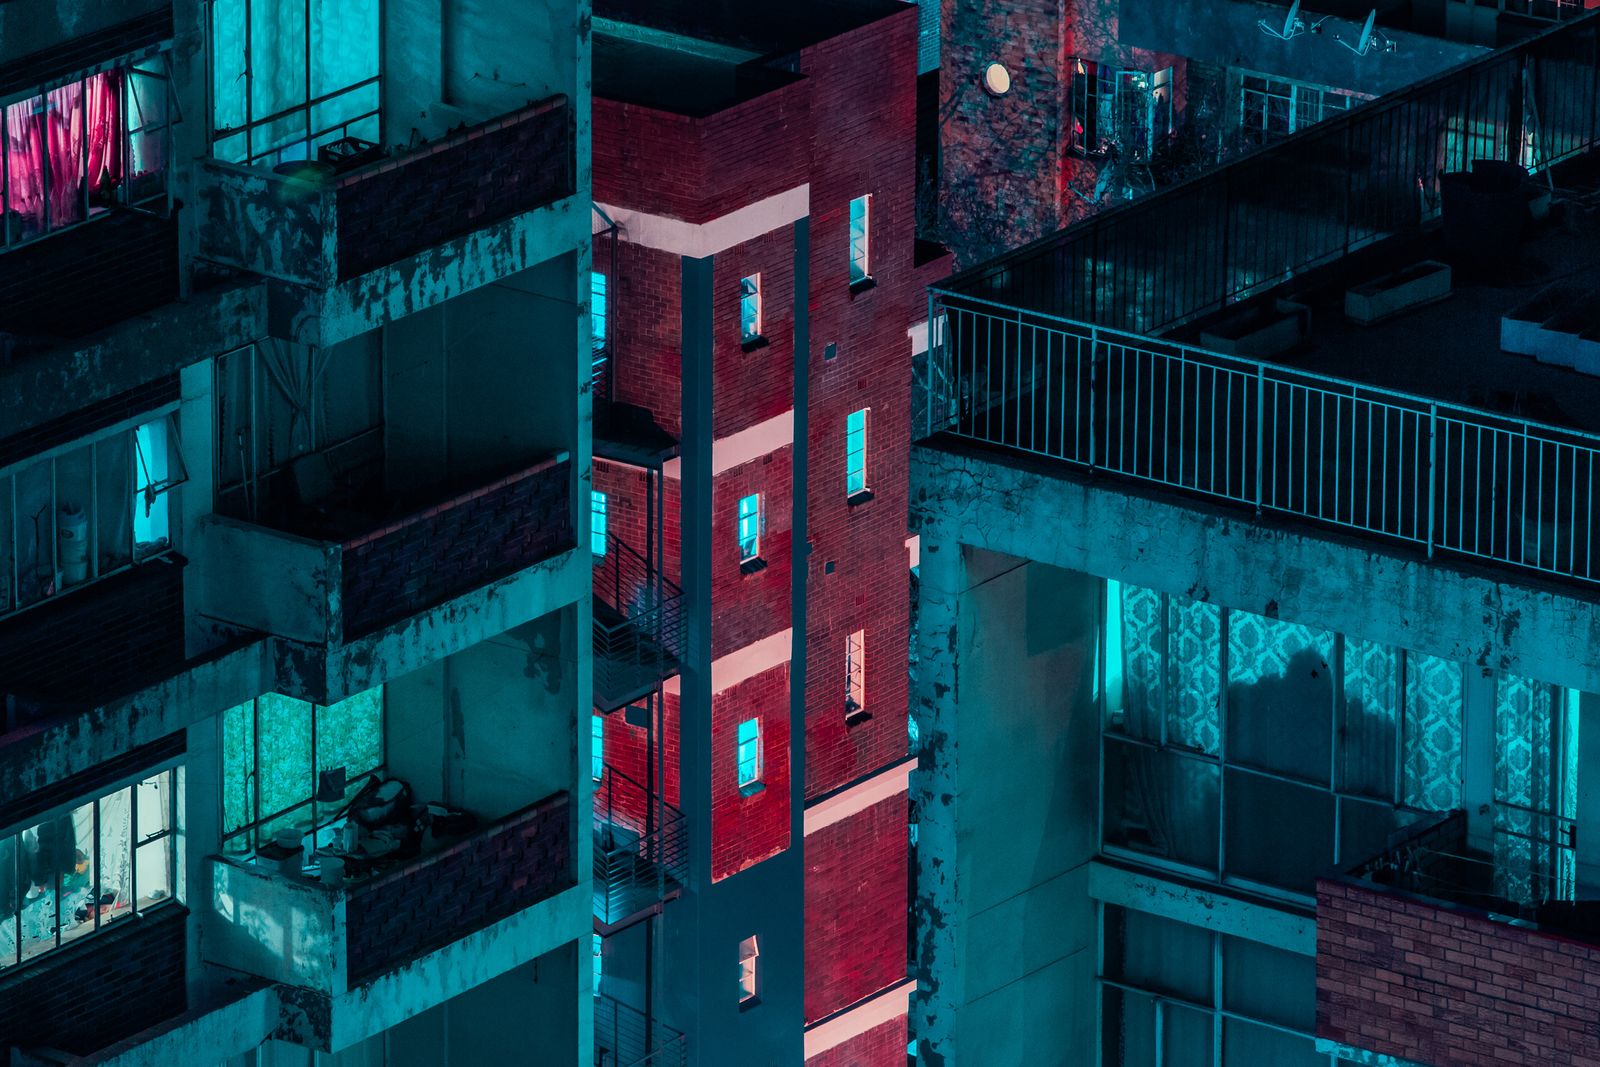 © Elsa Bleda - Image from the Nightscapes: Johannesburg photography project